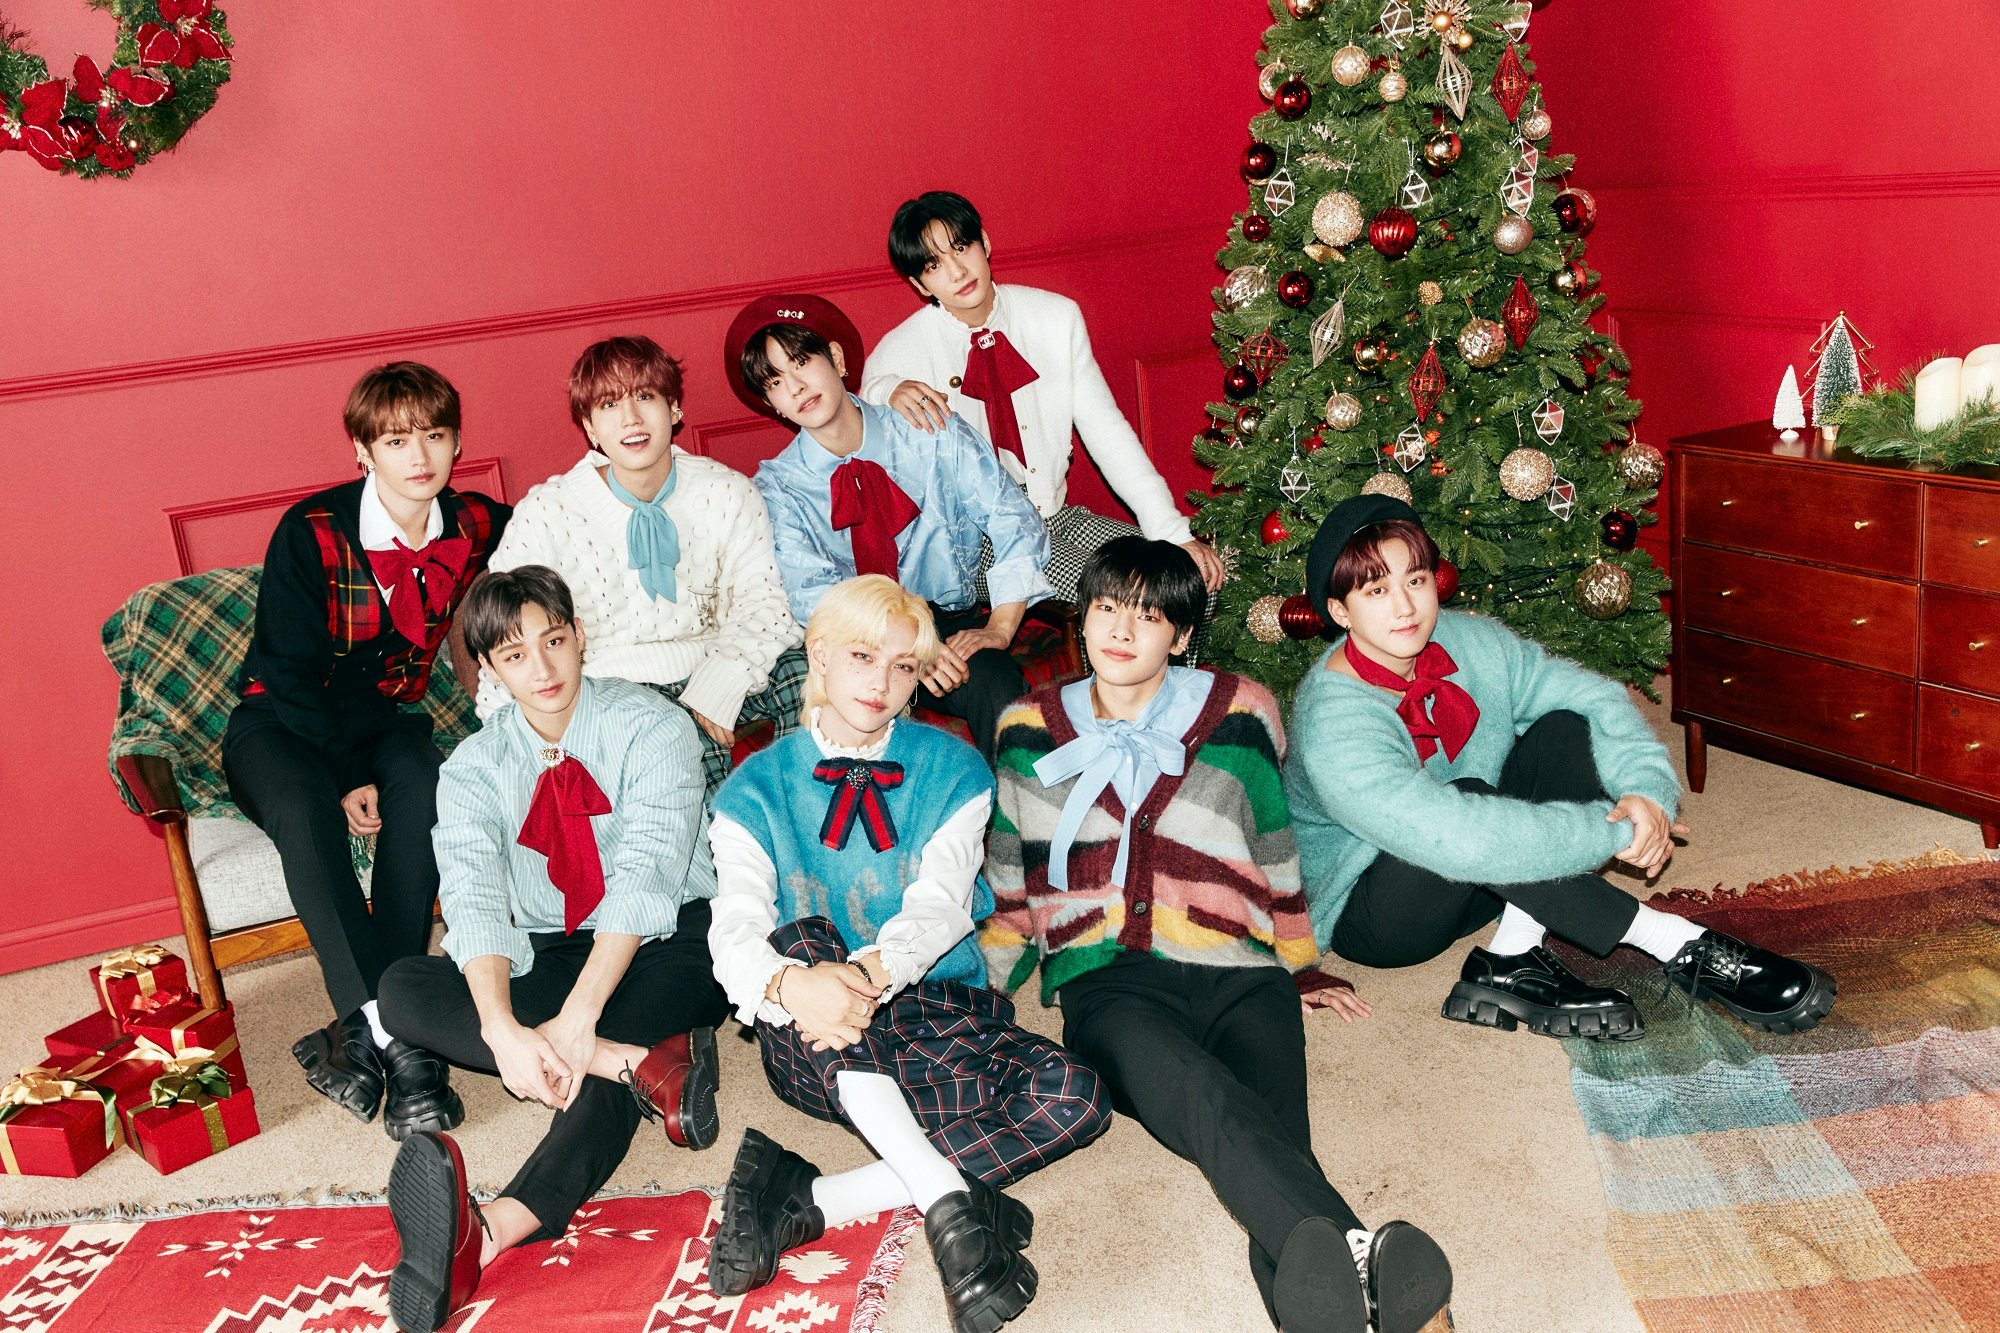 The members of the K-pop group Stray Kids pose with Christmas-themed decor